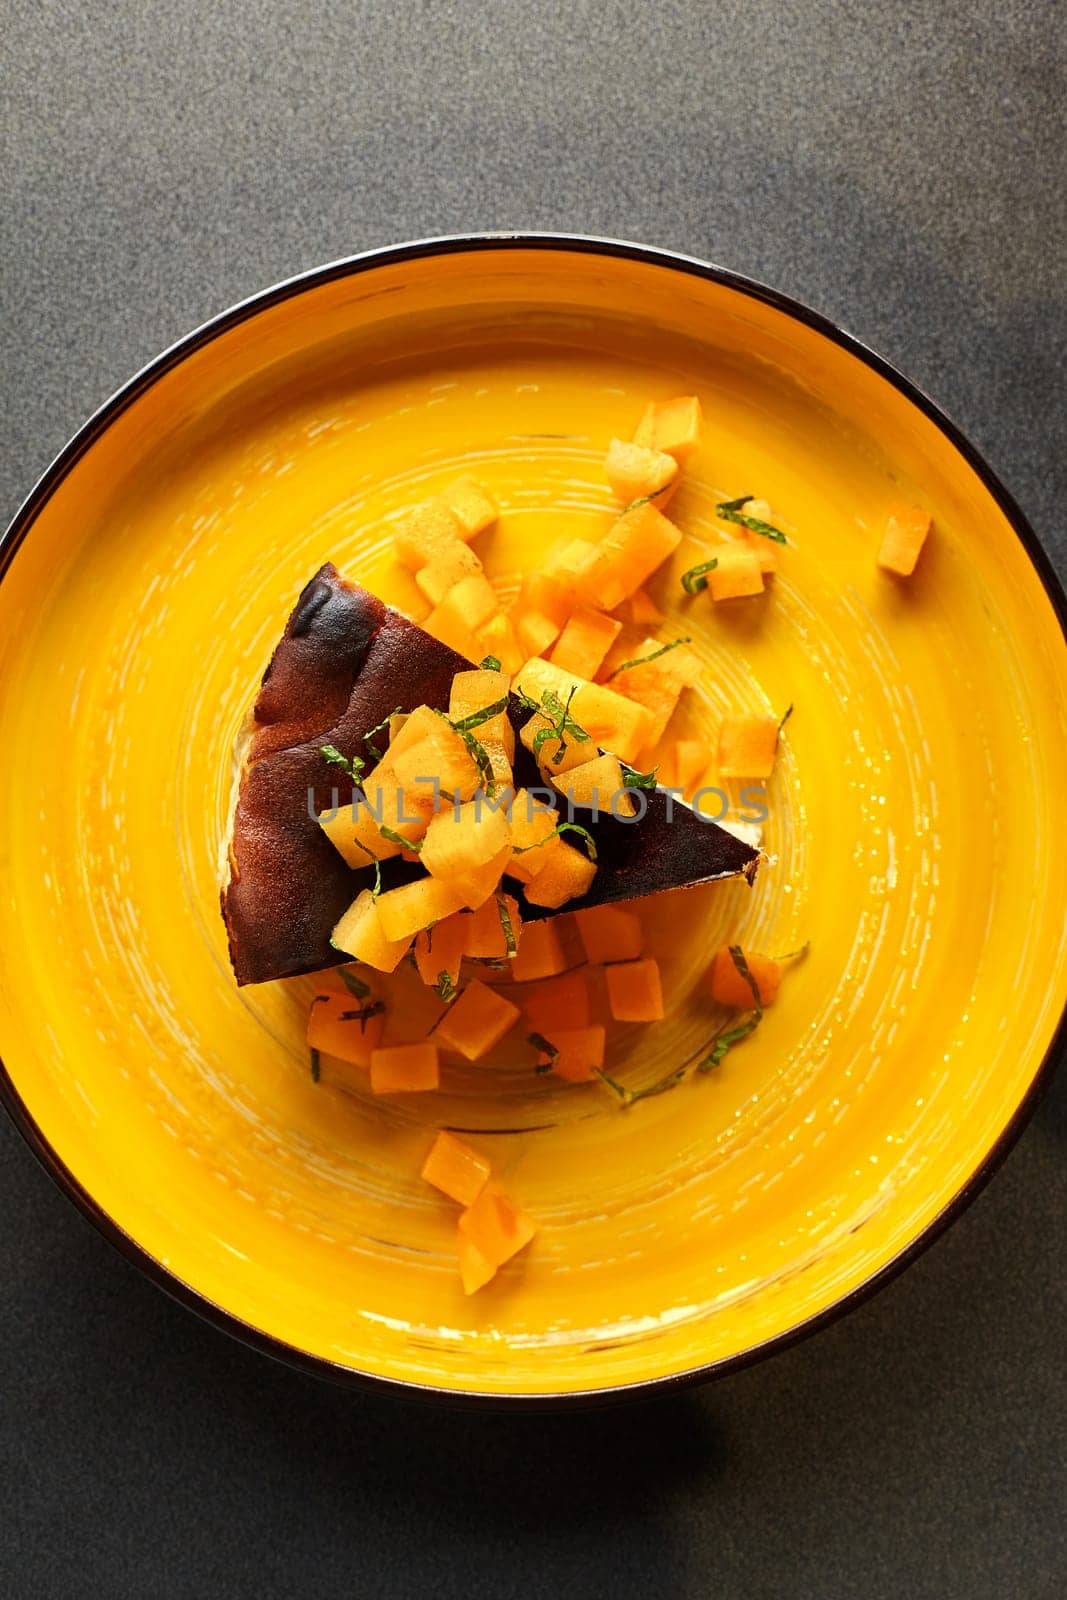 Rich caramelized burnt Basque cheesecake garnished with diced persimmon and fresh mint, displayed on bold yellow plate. Popular pastries concept